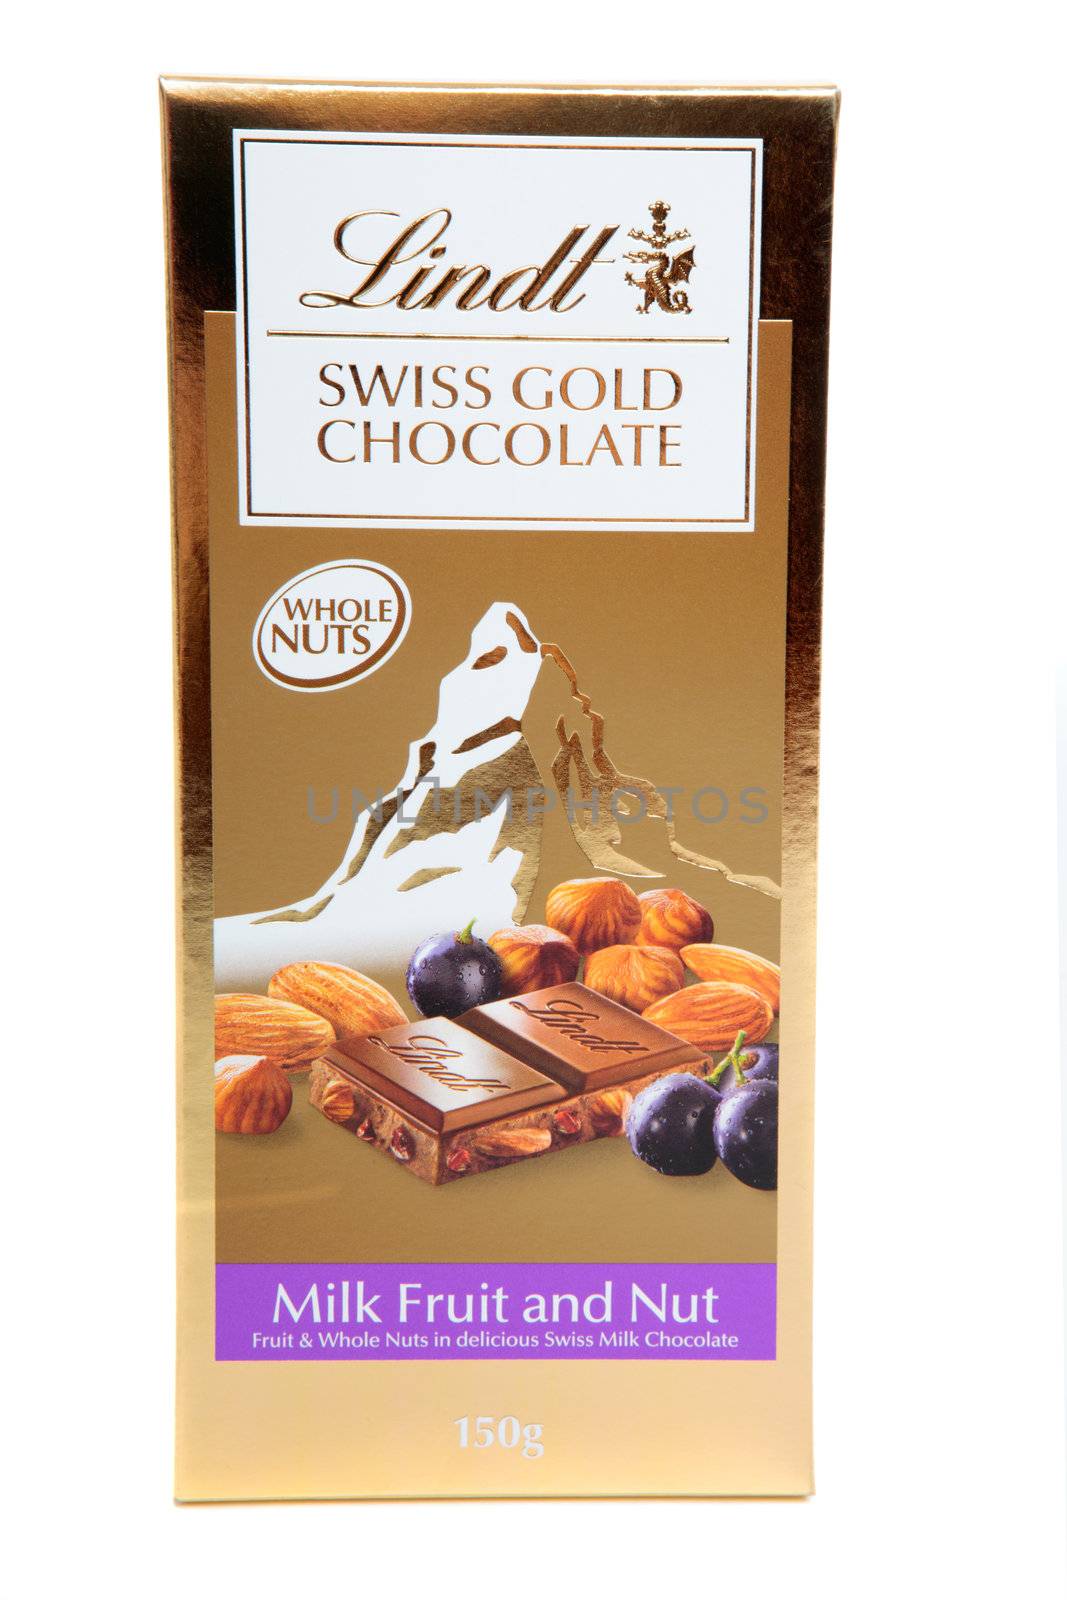 A block of Lindt Swiss Gold premium chocolate 100g with fruit and whole nuts.  White background.  EDITORIAL ONLY.